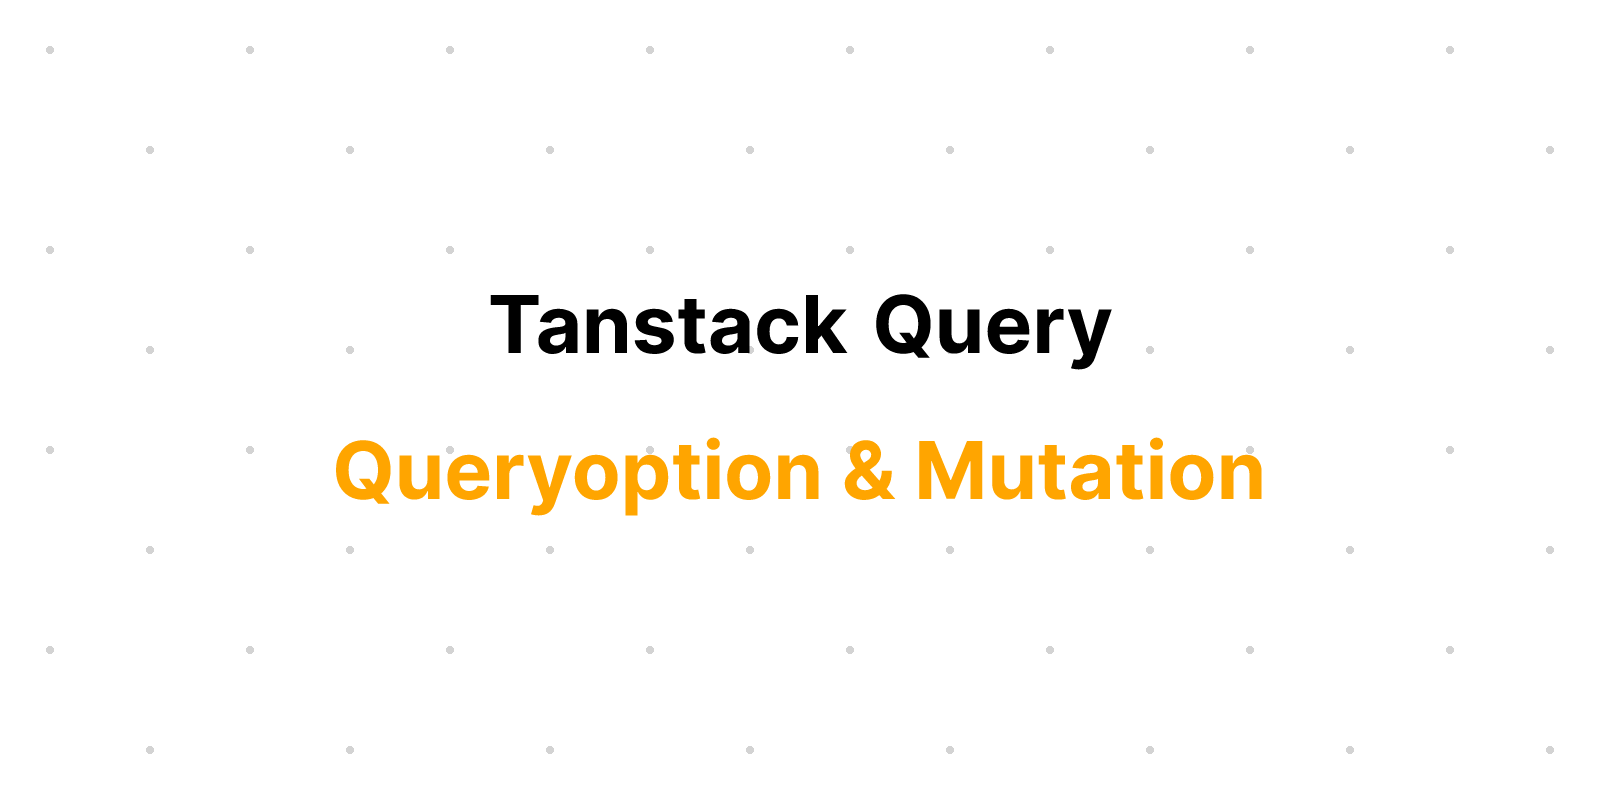  TanStack Query is a powerful and Battle-tested library for managing asynchronous state in React applications. It provides a robust and intuitive solu